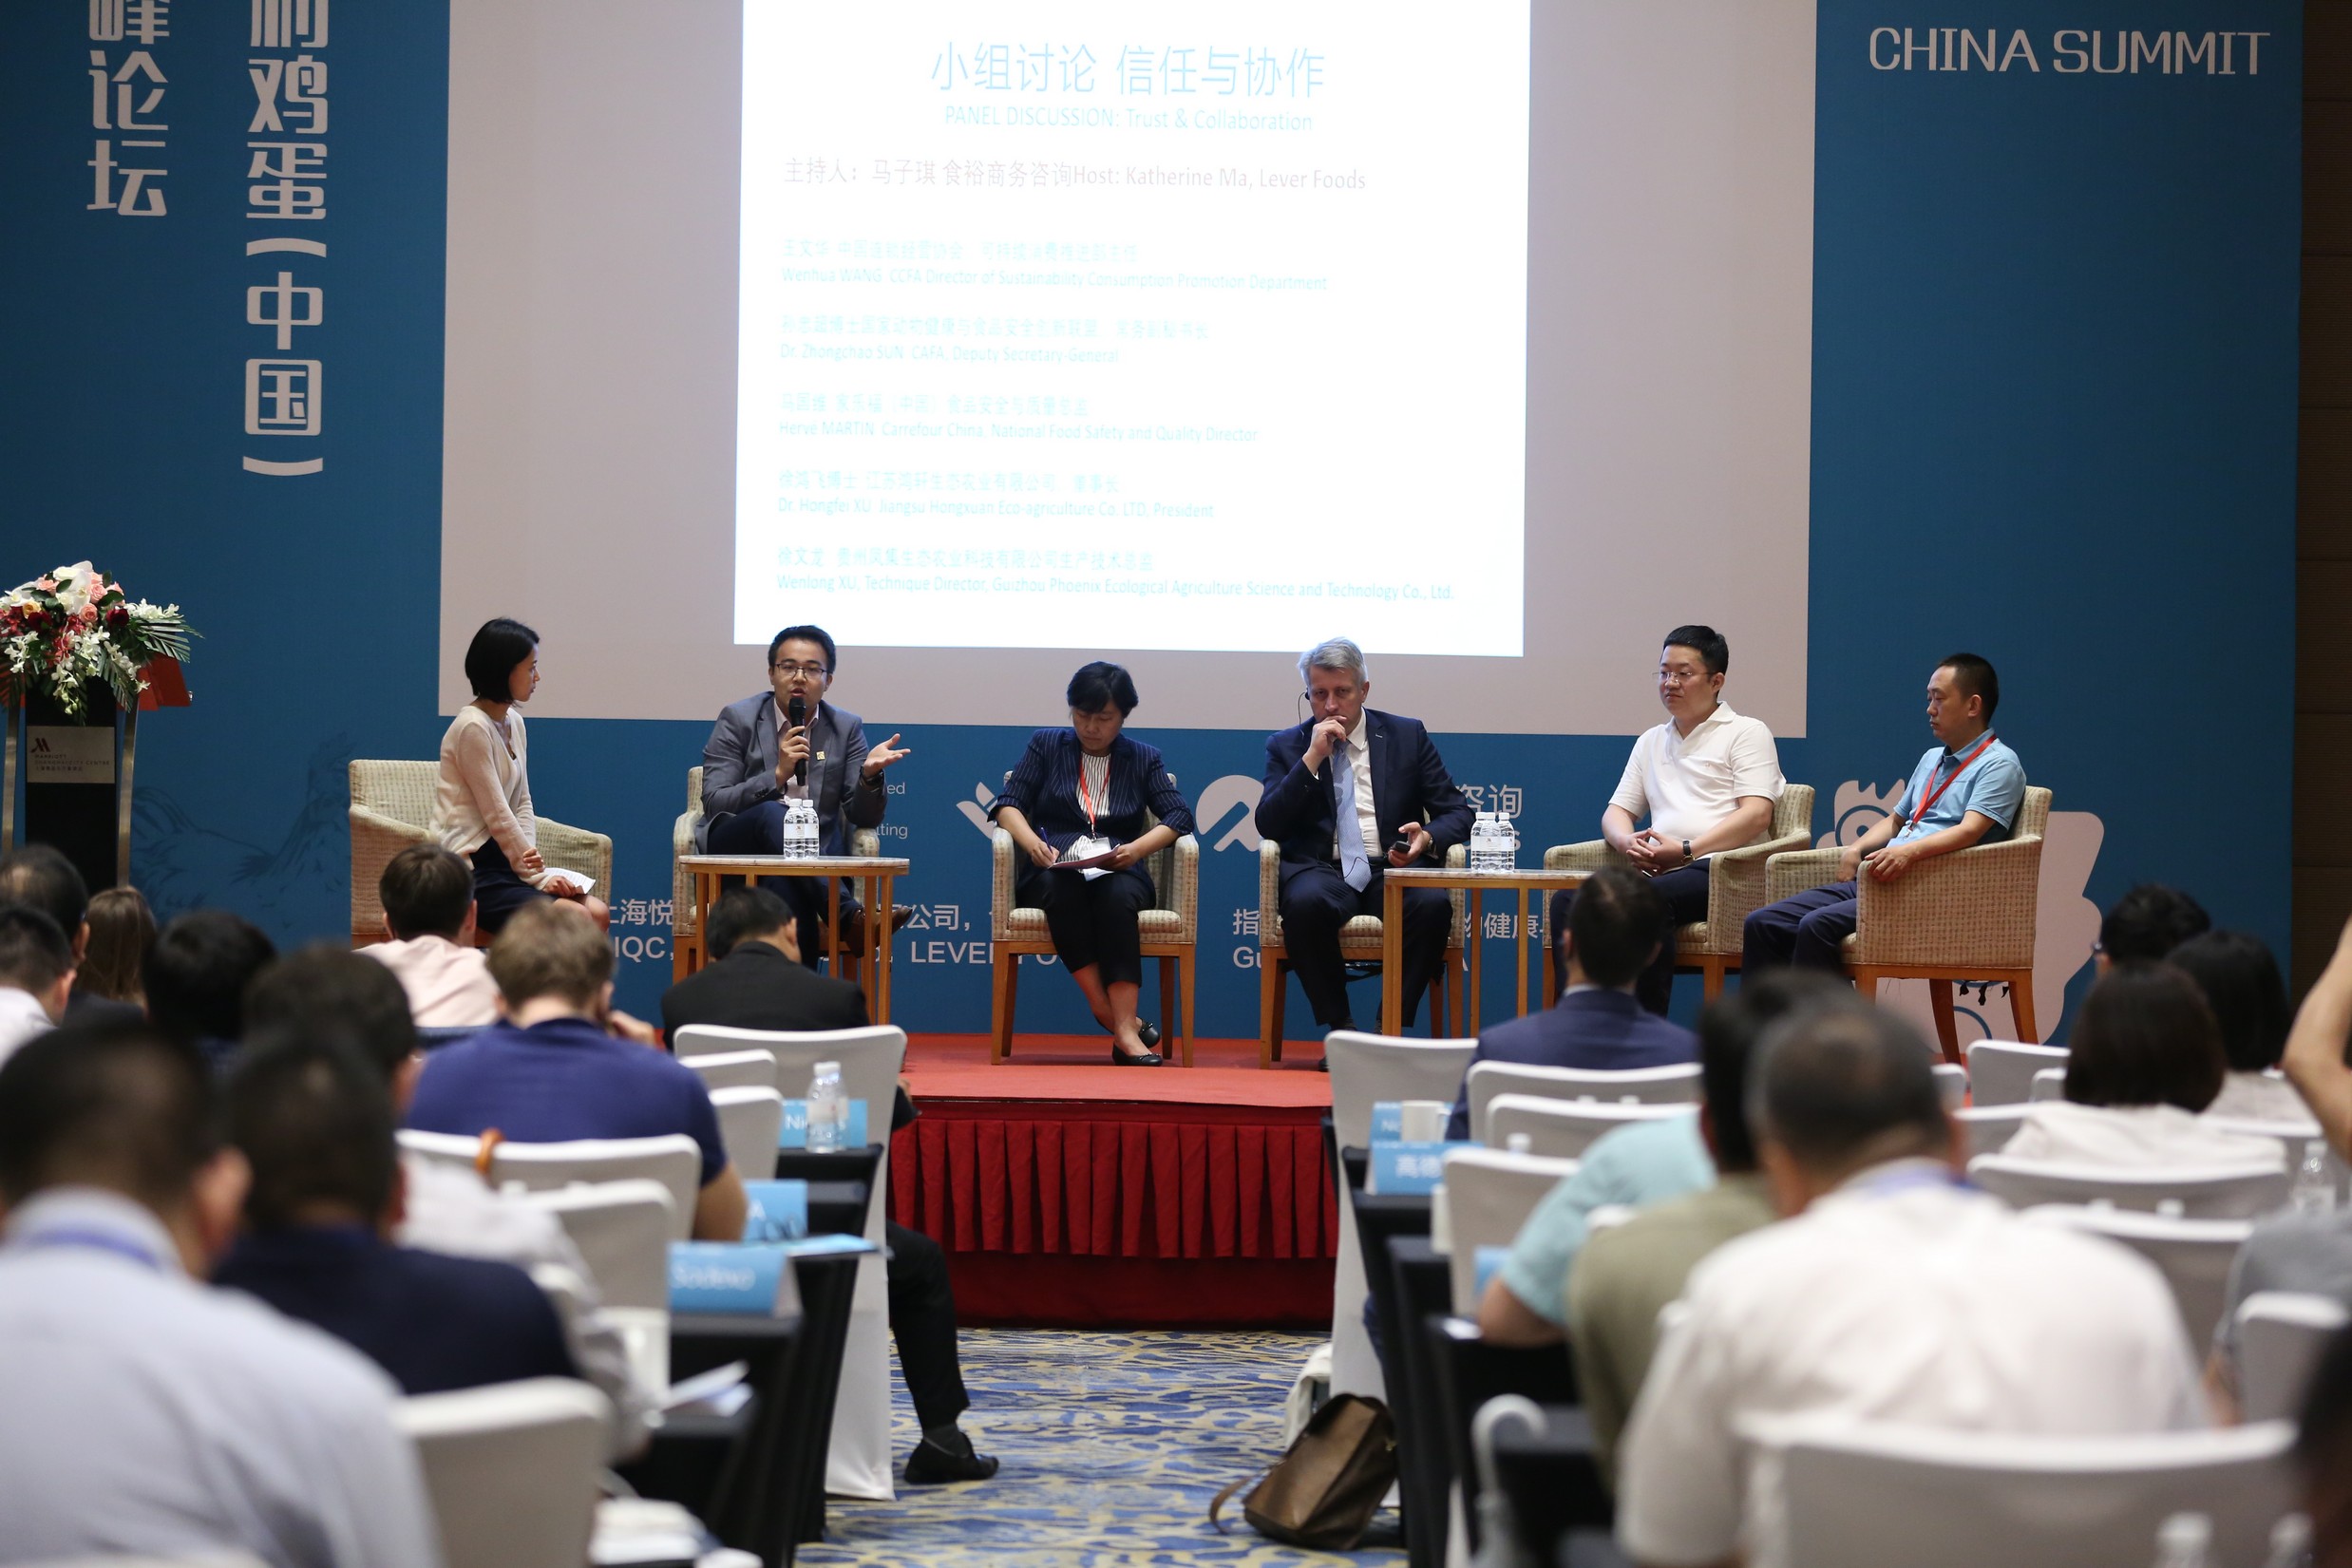 Katherine Ma, project manager at Lever Foods, hosted the panel discussion